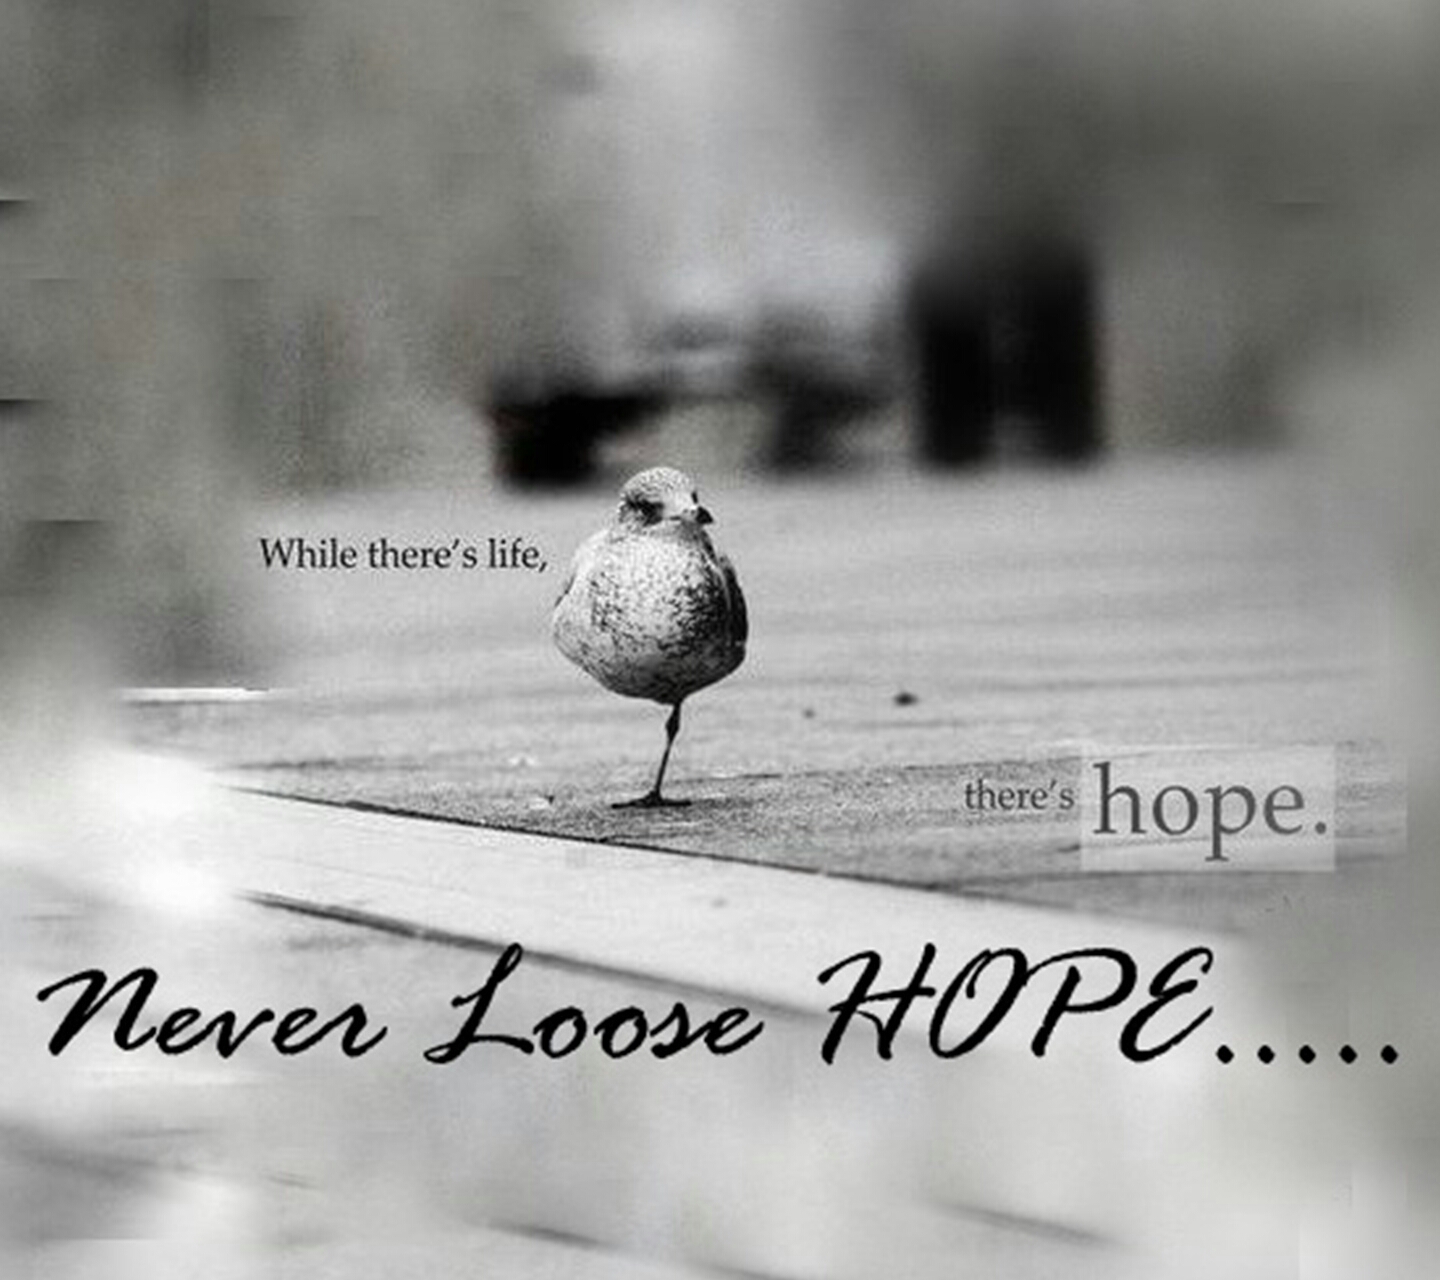 While there is life there is. Lose hope. Never lose hope. Don't lose hope image.